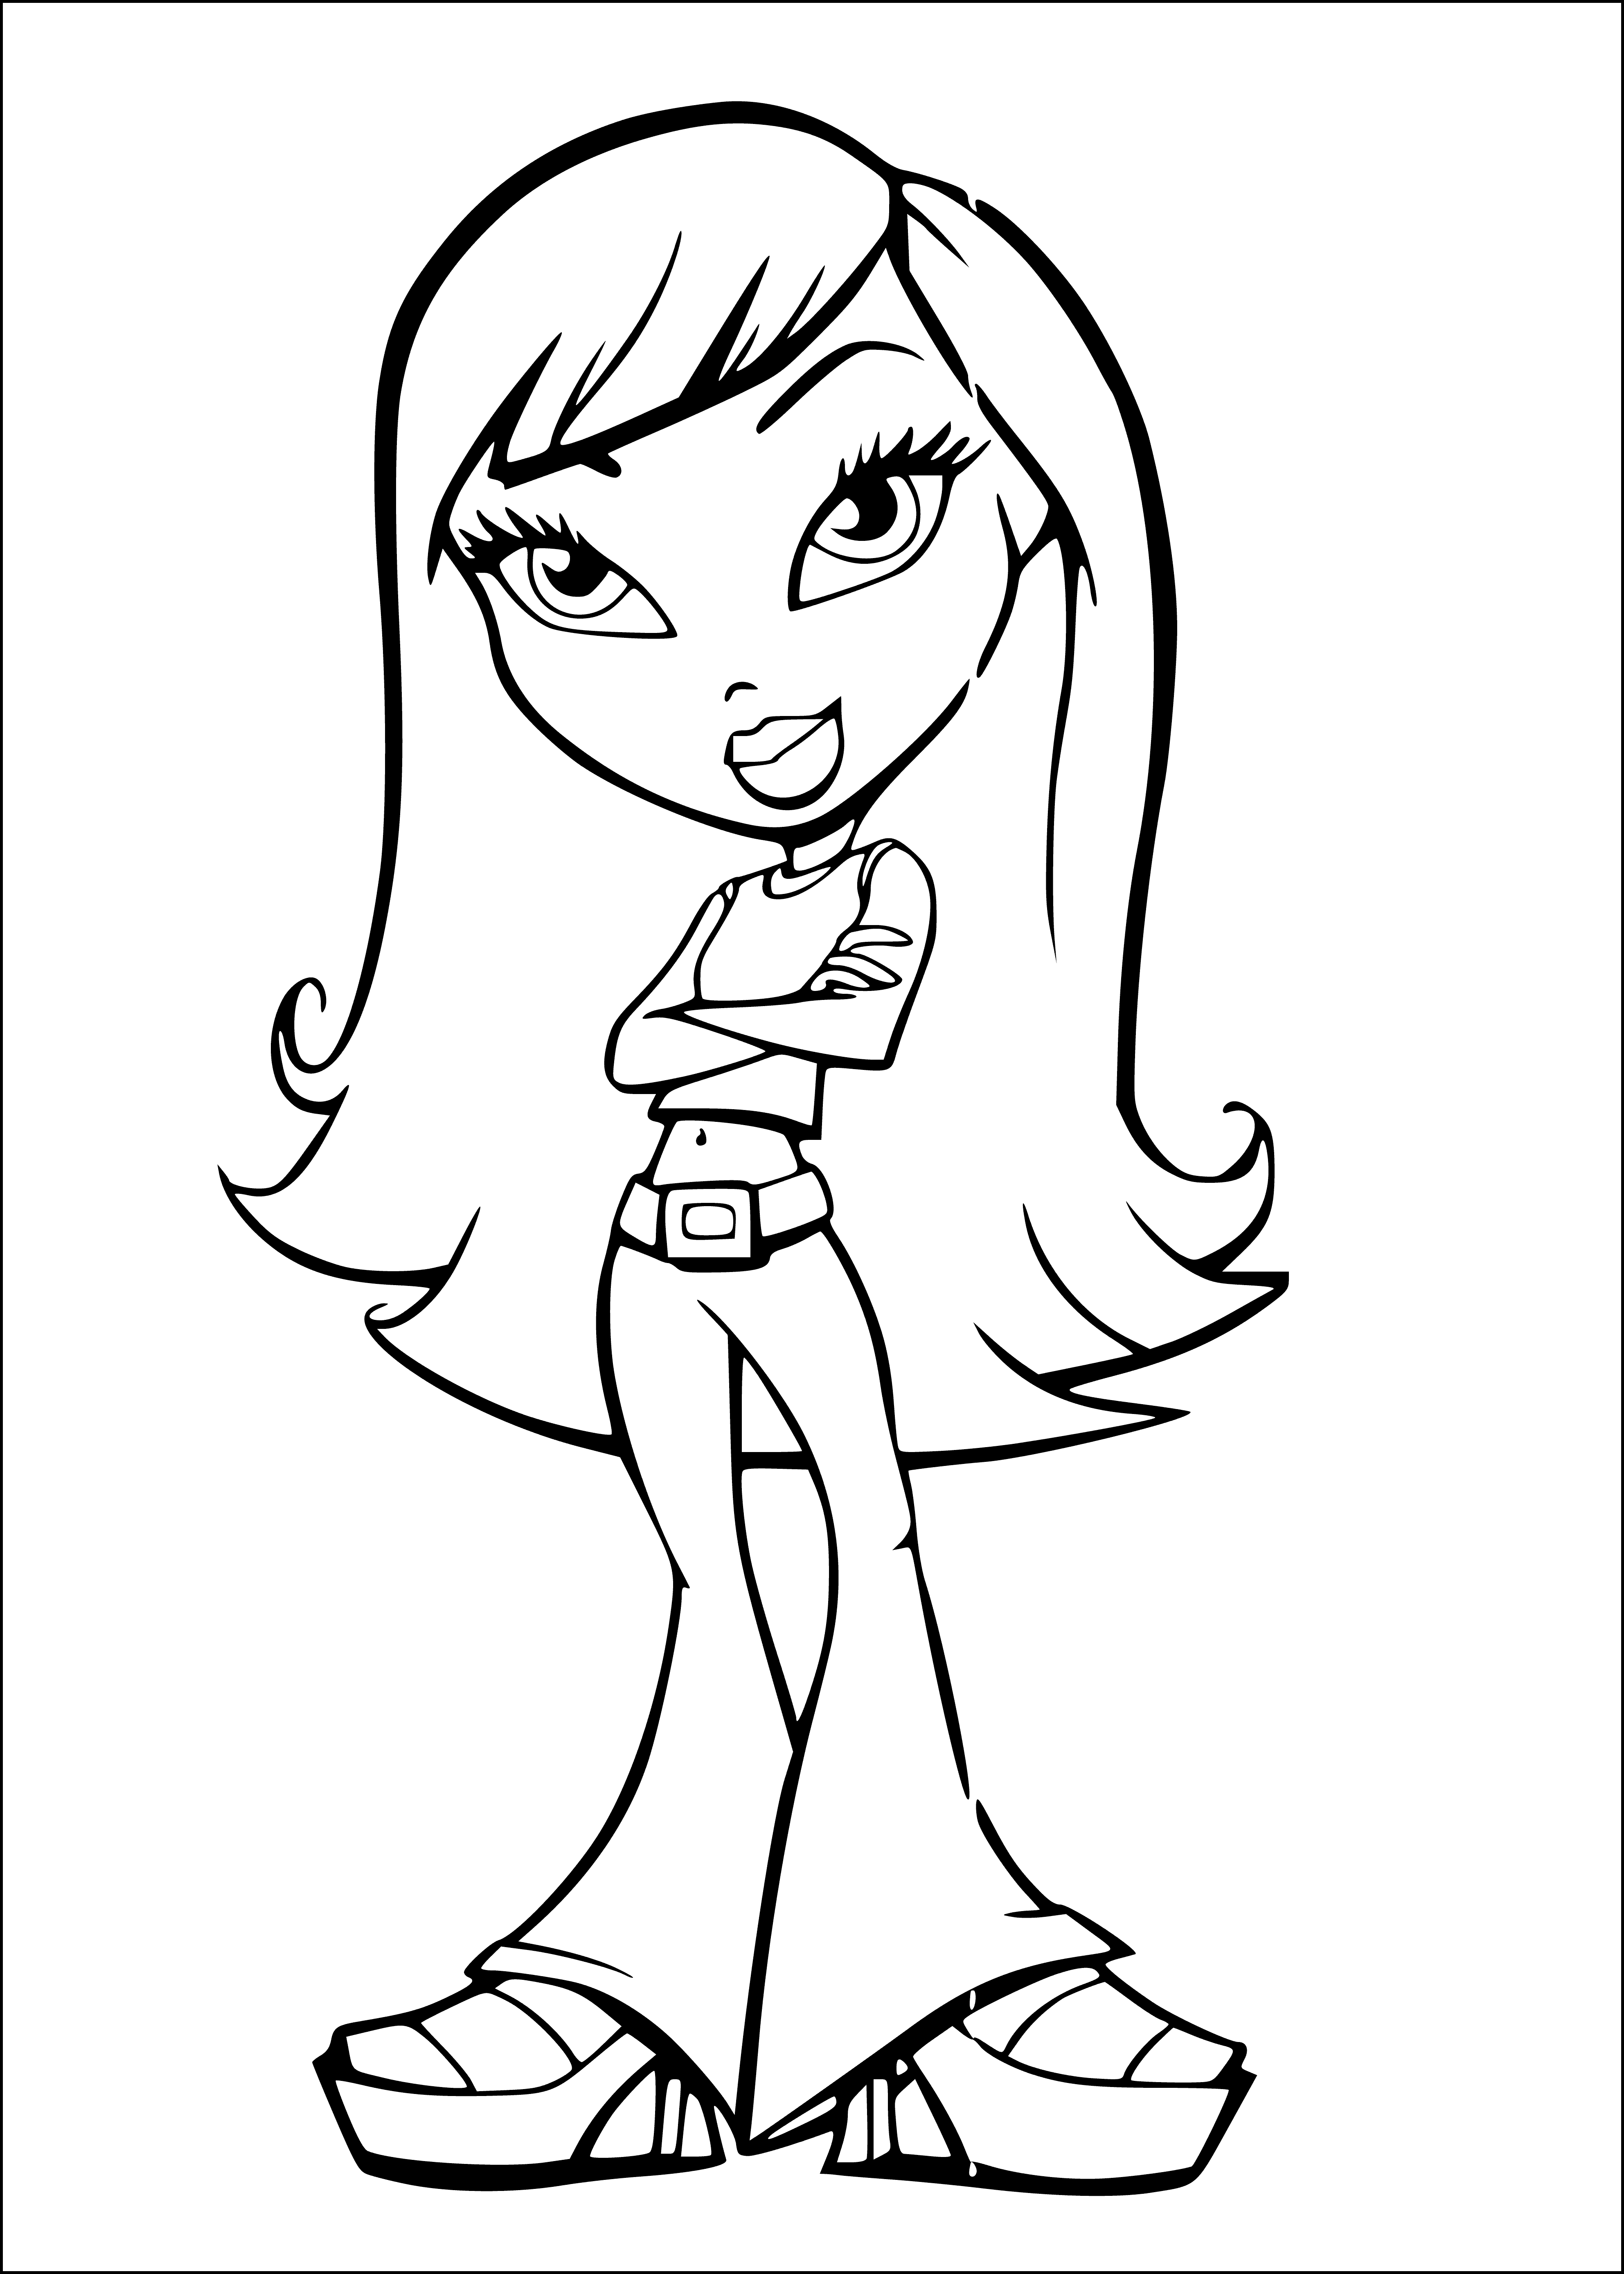 coloring page: Doll in coloring page has long pink hair, blue eyes, pink top, black/white skirt & boots. #Bratz #ColoringPage #Doll